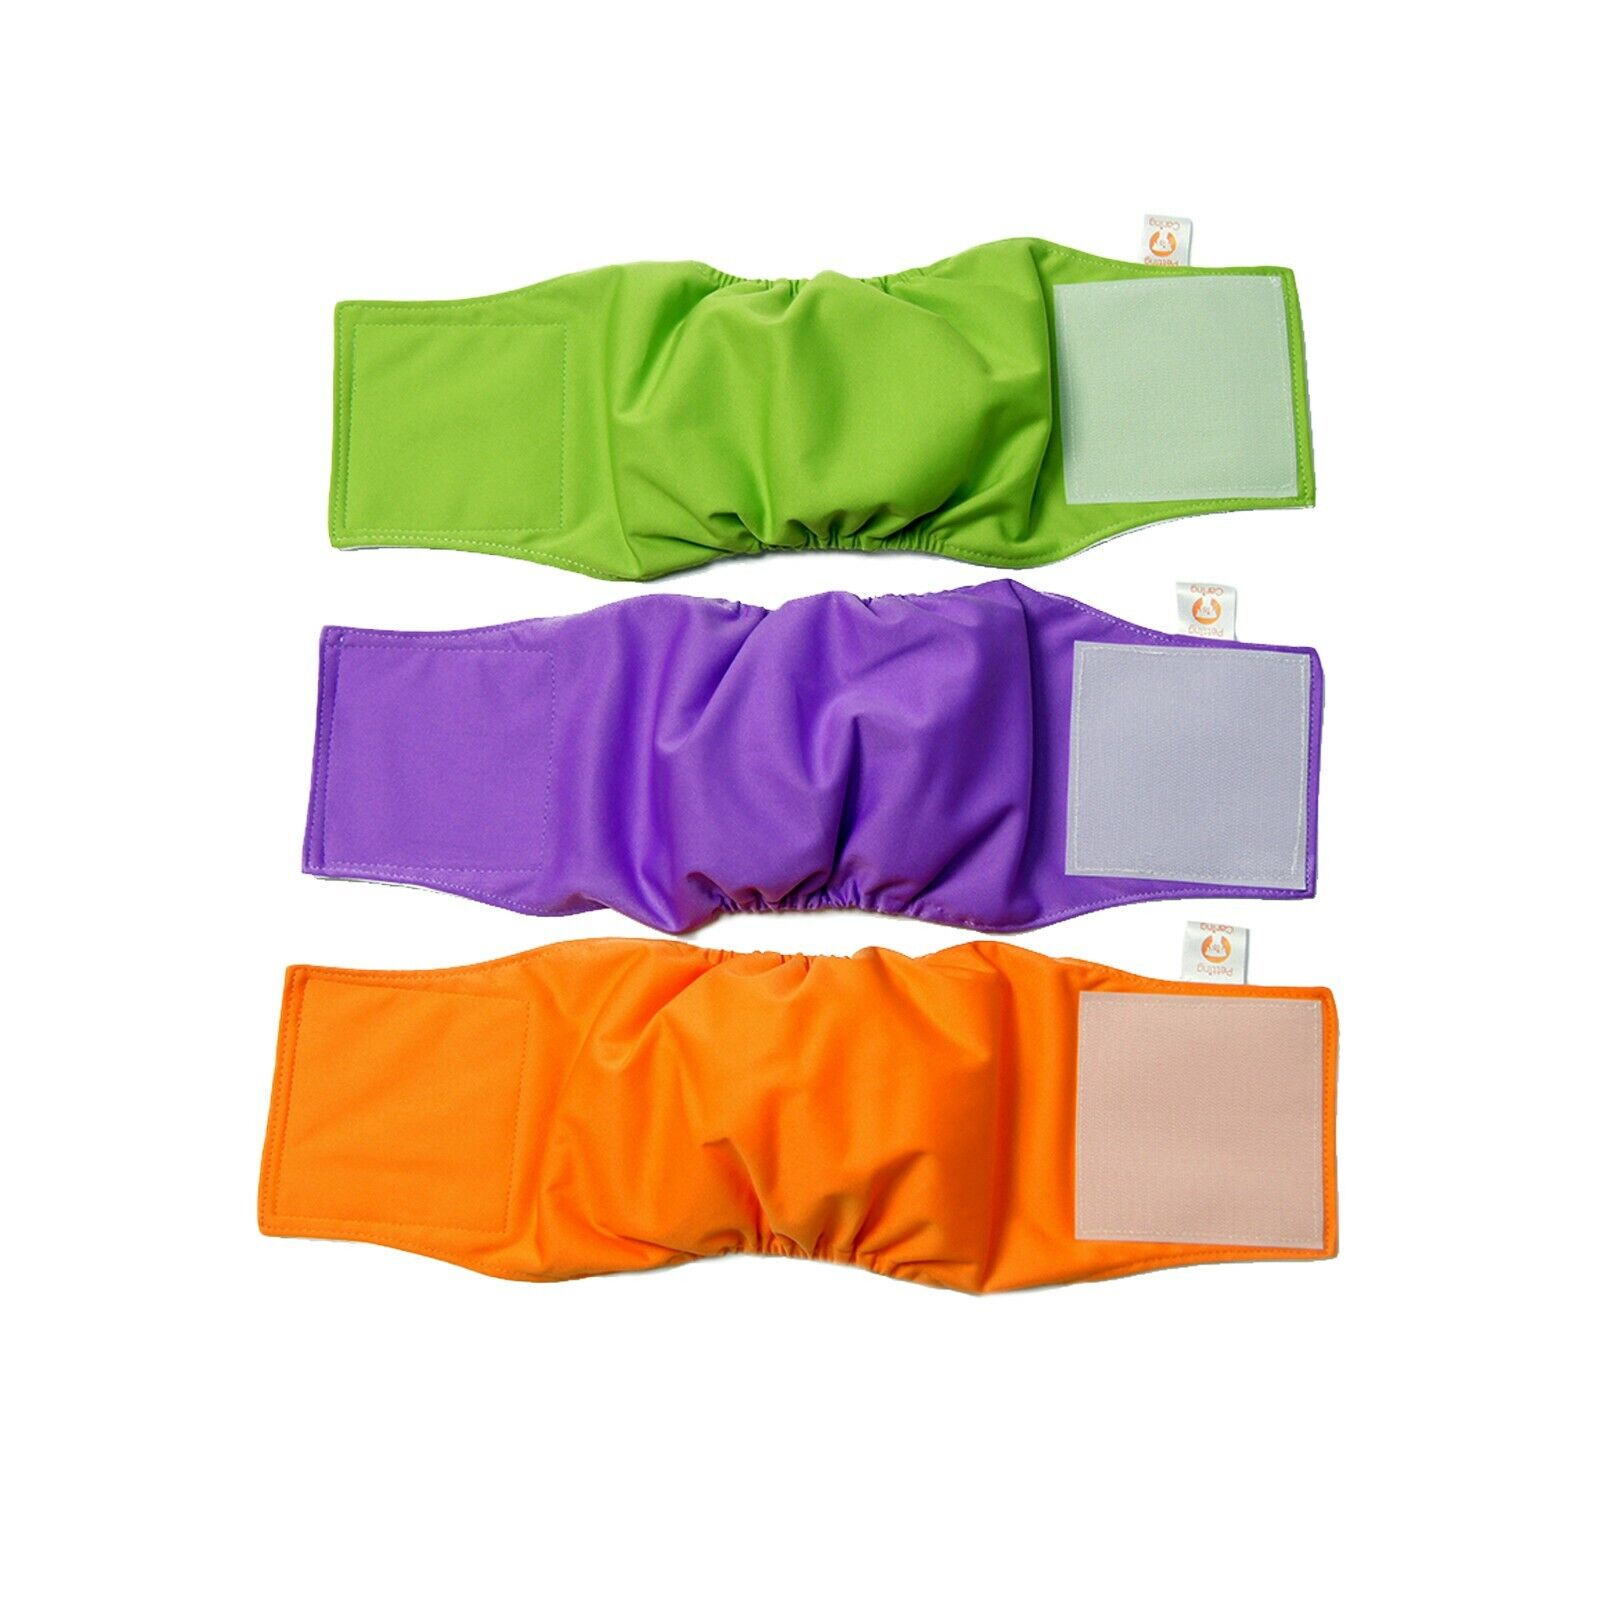 MALE DOG Belly Band WRAPS WASHABLE by PETTING IS CARING - Set Pack 3 of units 